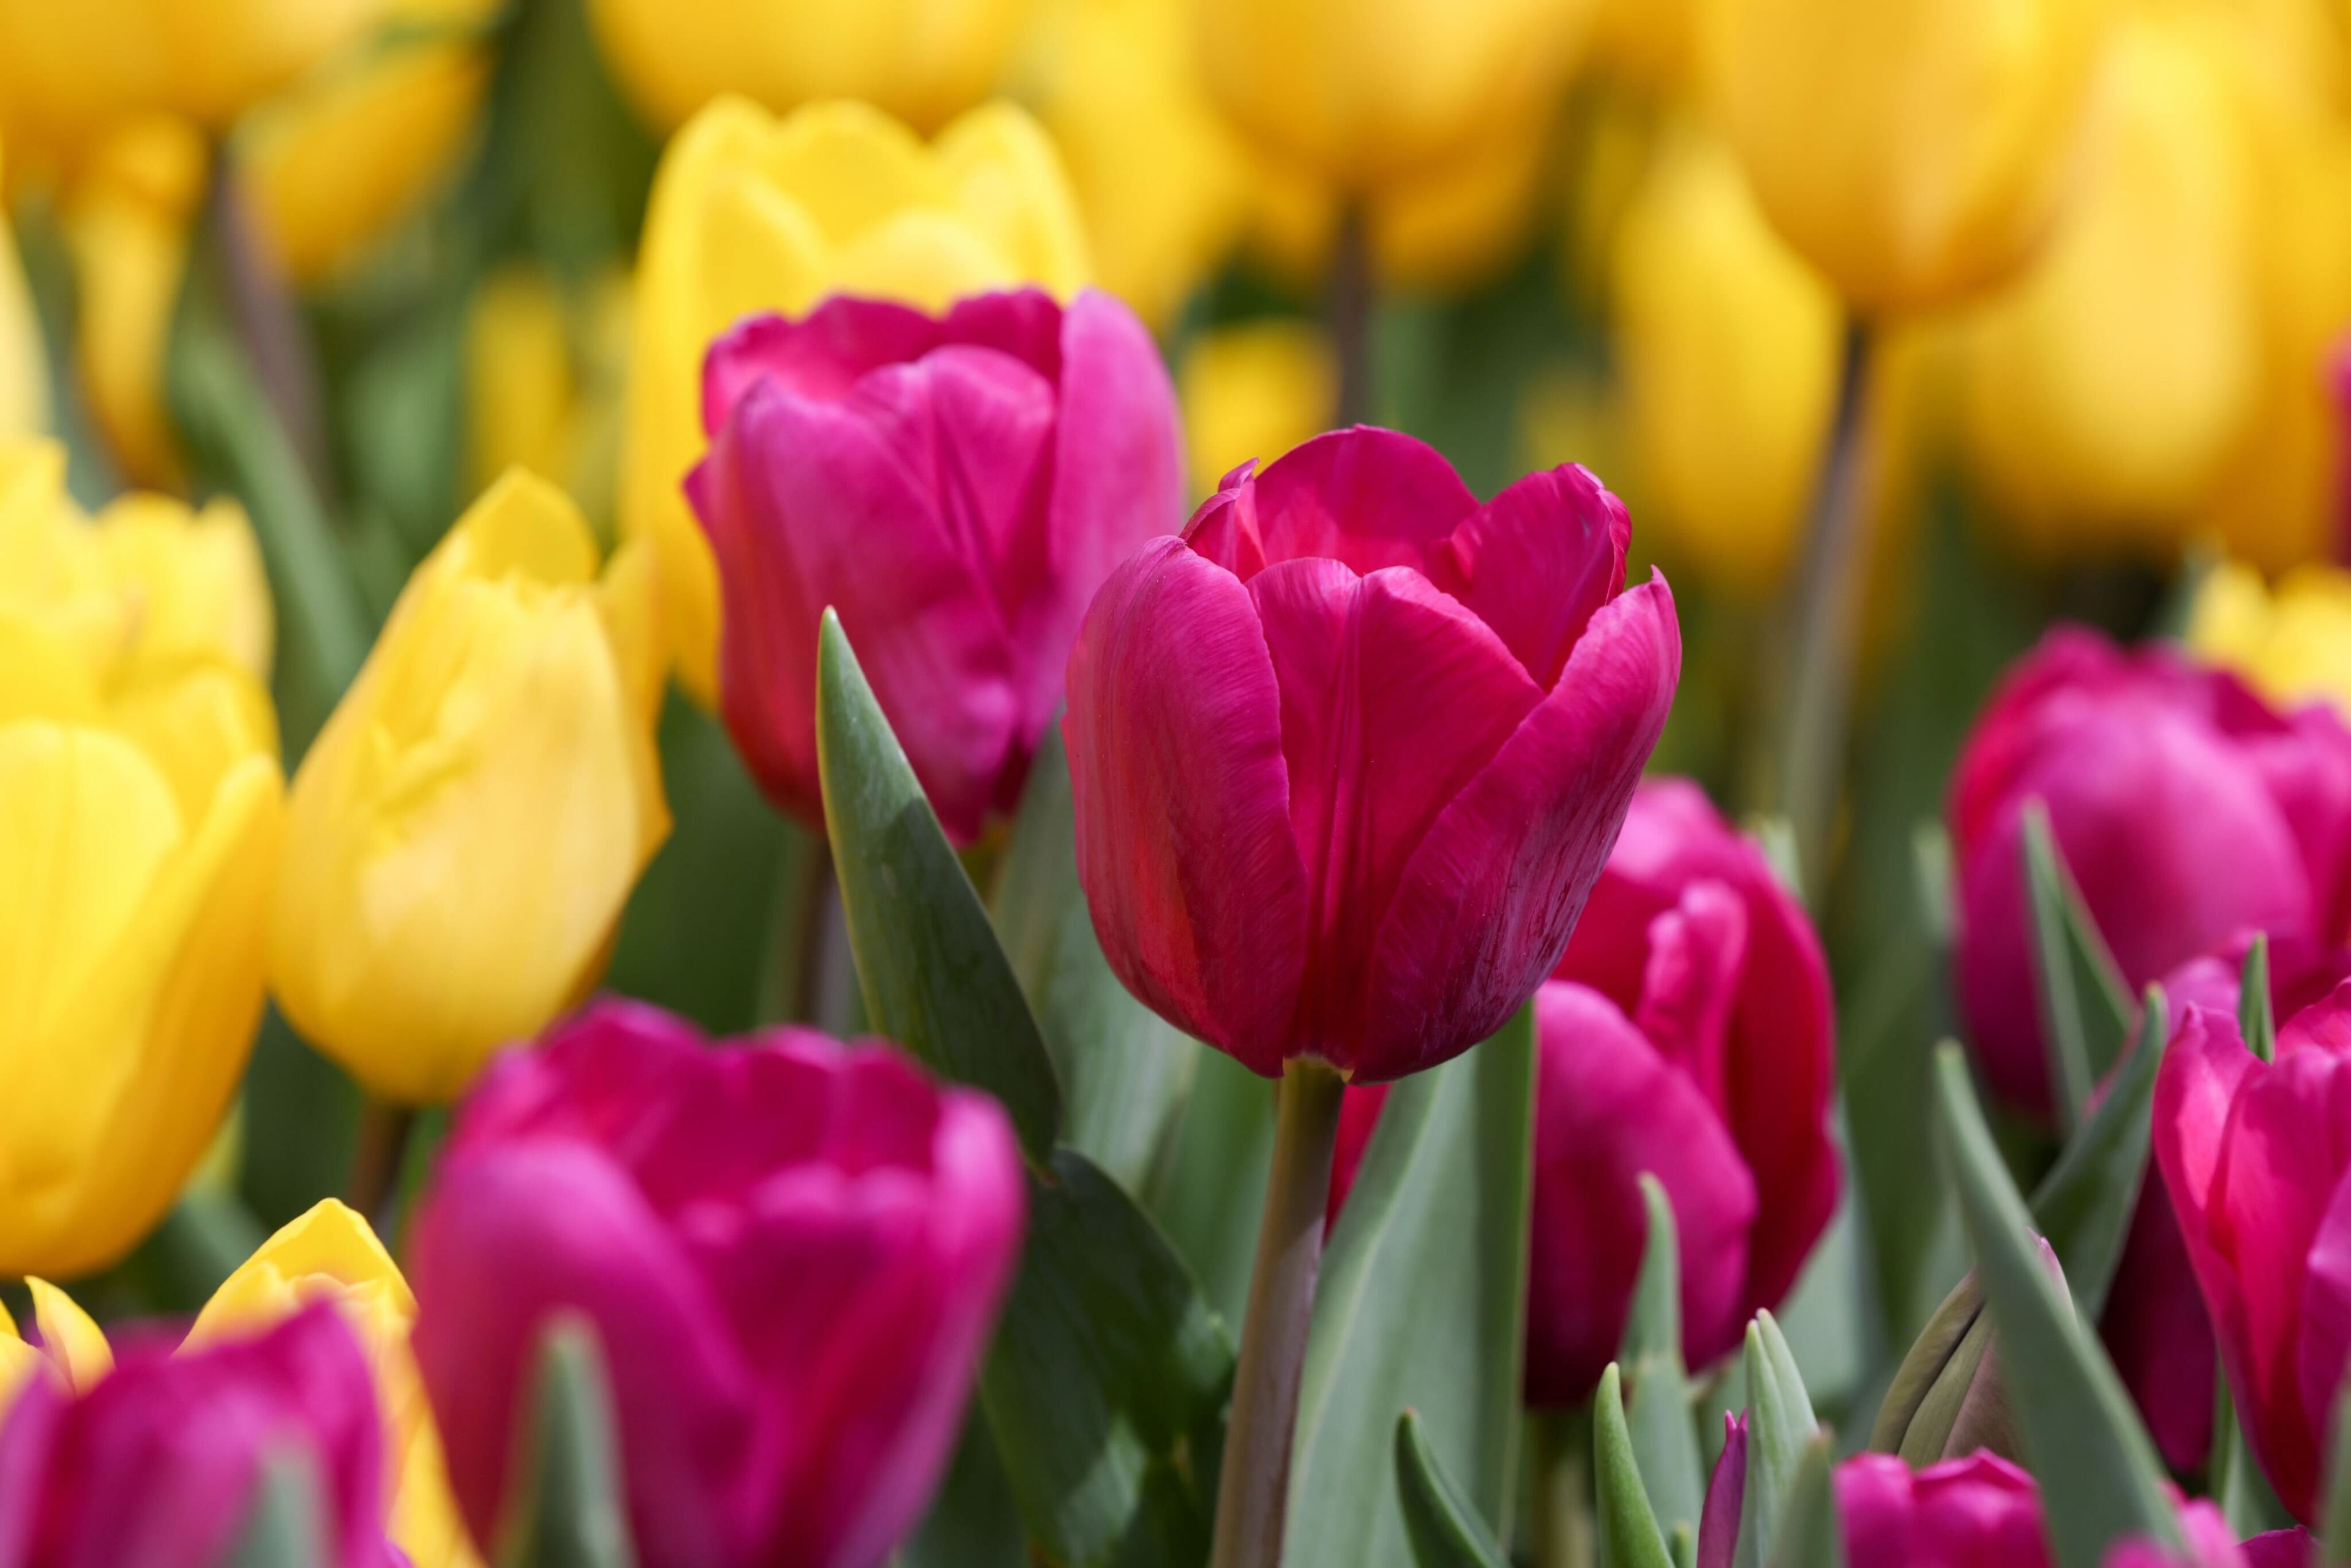 A field of vibrant yellow and purple tulips in full bloom.